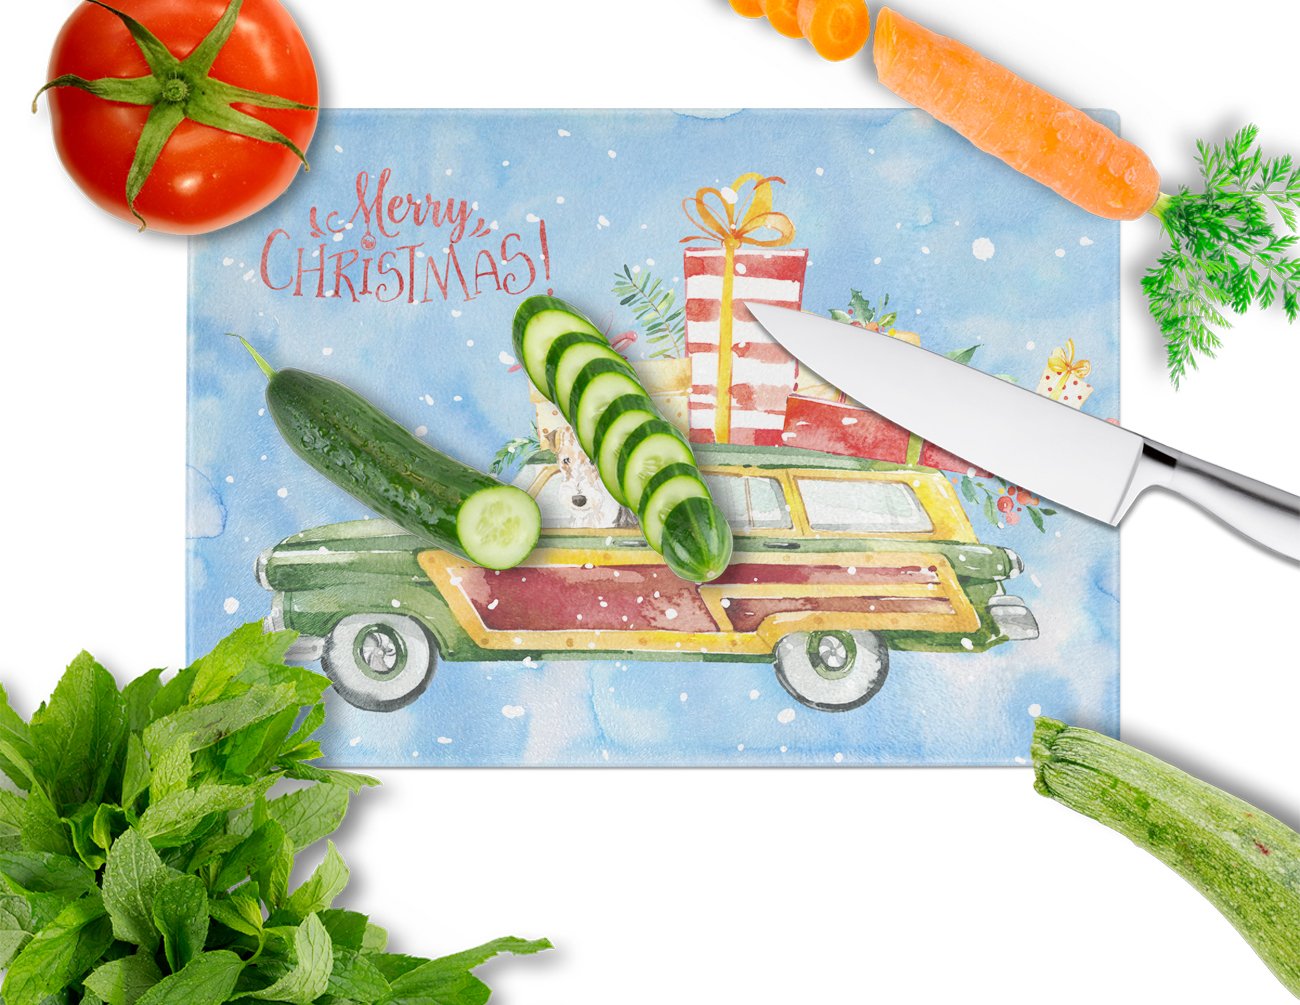 Merry Christmas Fox Terrier Glass Cutting Board Large CK2430LCB by Caroline's Treasures